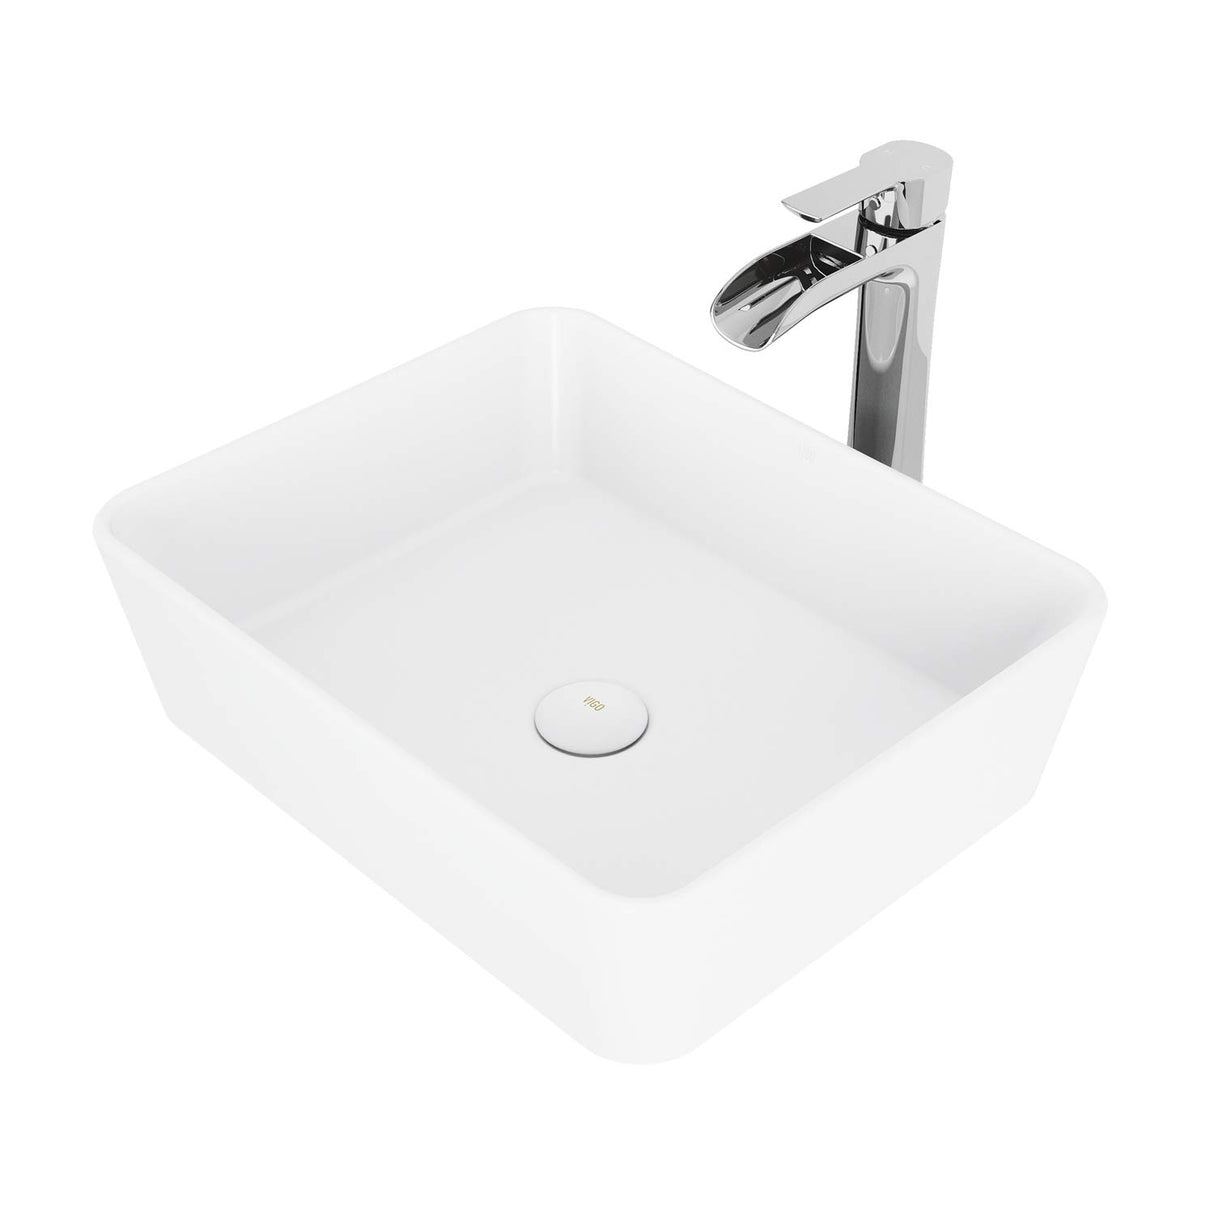 VIGO VGT1085MW 14.38" L -17.75" W -10.5" H Handmade Matte Stone Rectangle Vessel Bathroom Sink Set in Matte White Finish with Chrome Single-Handle Single Hole Waterfall Faucet and Pop Up Drain